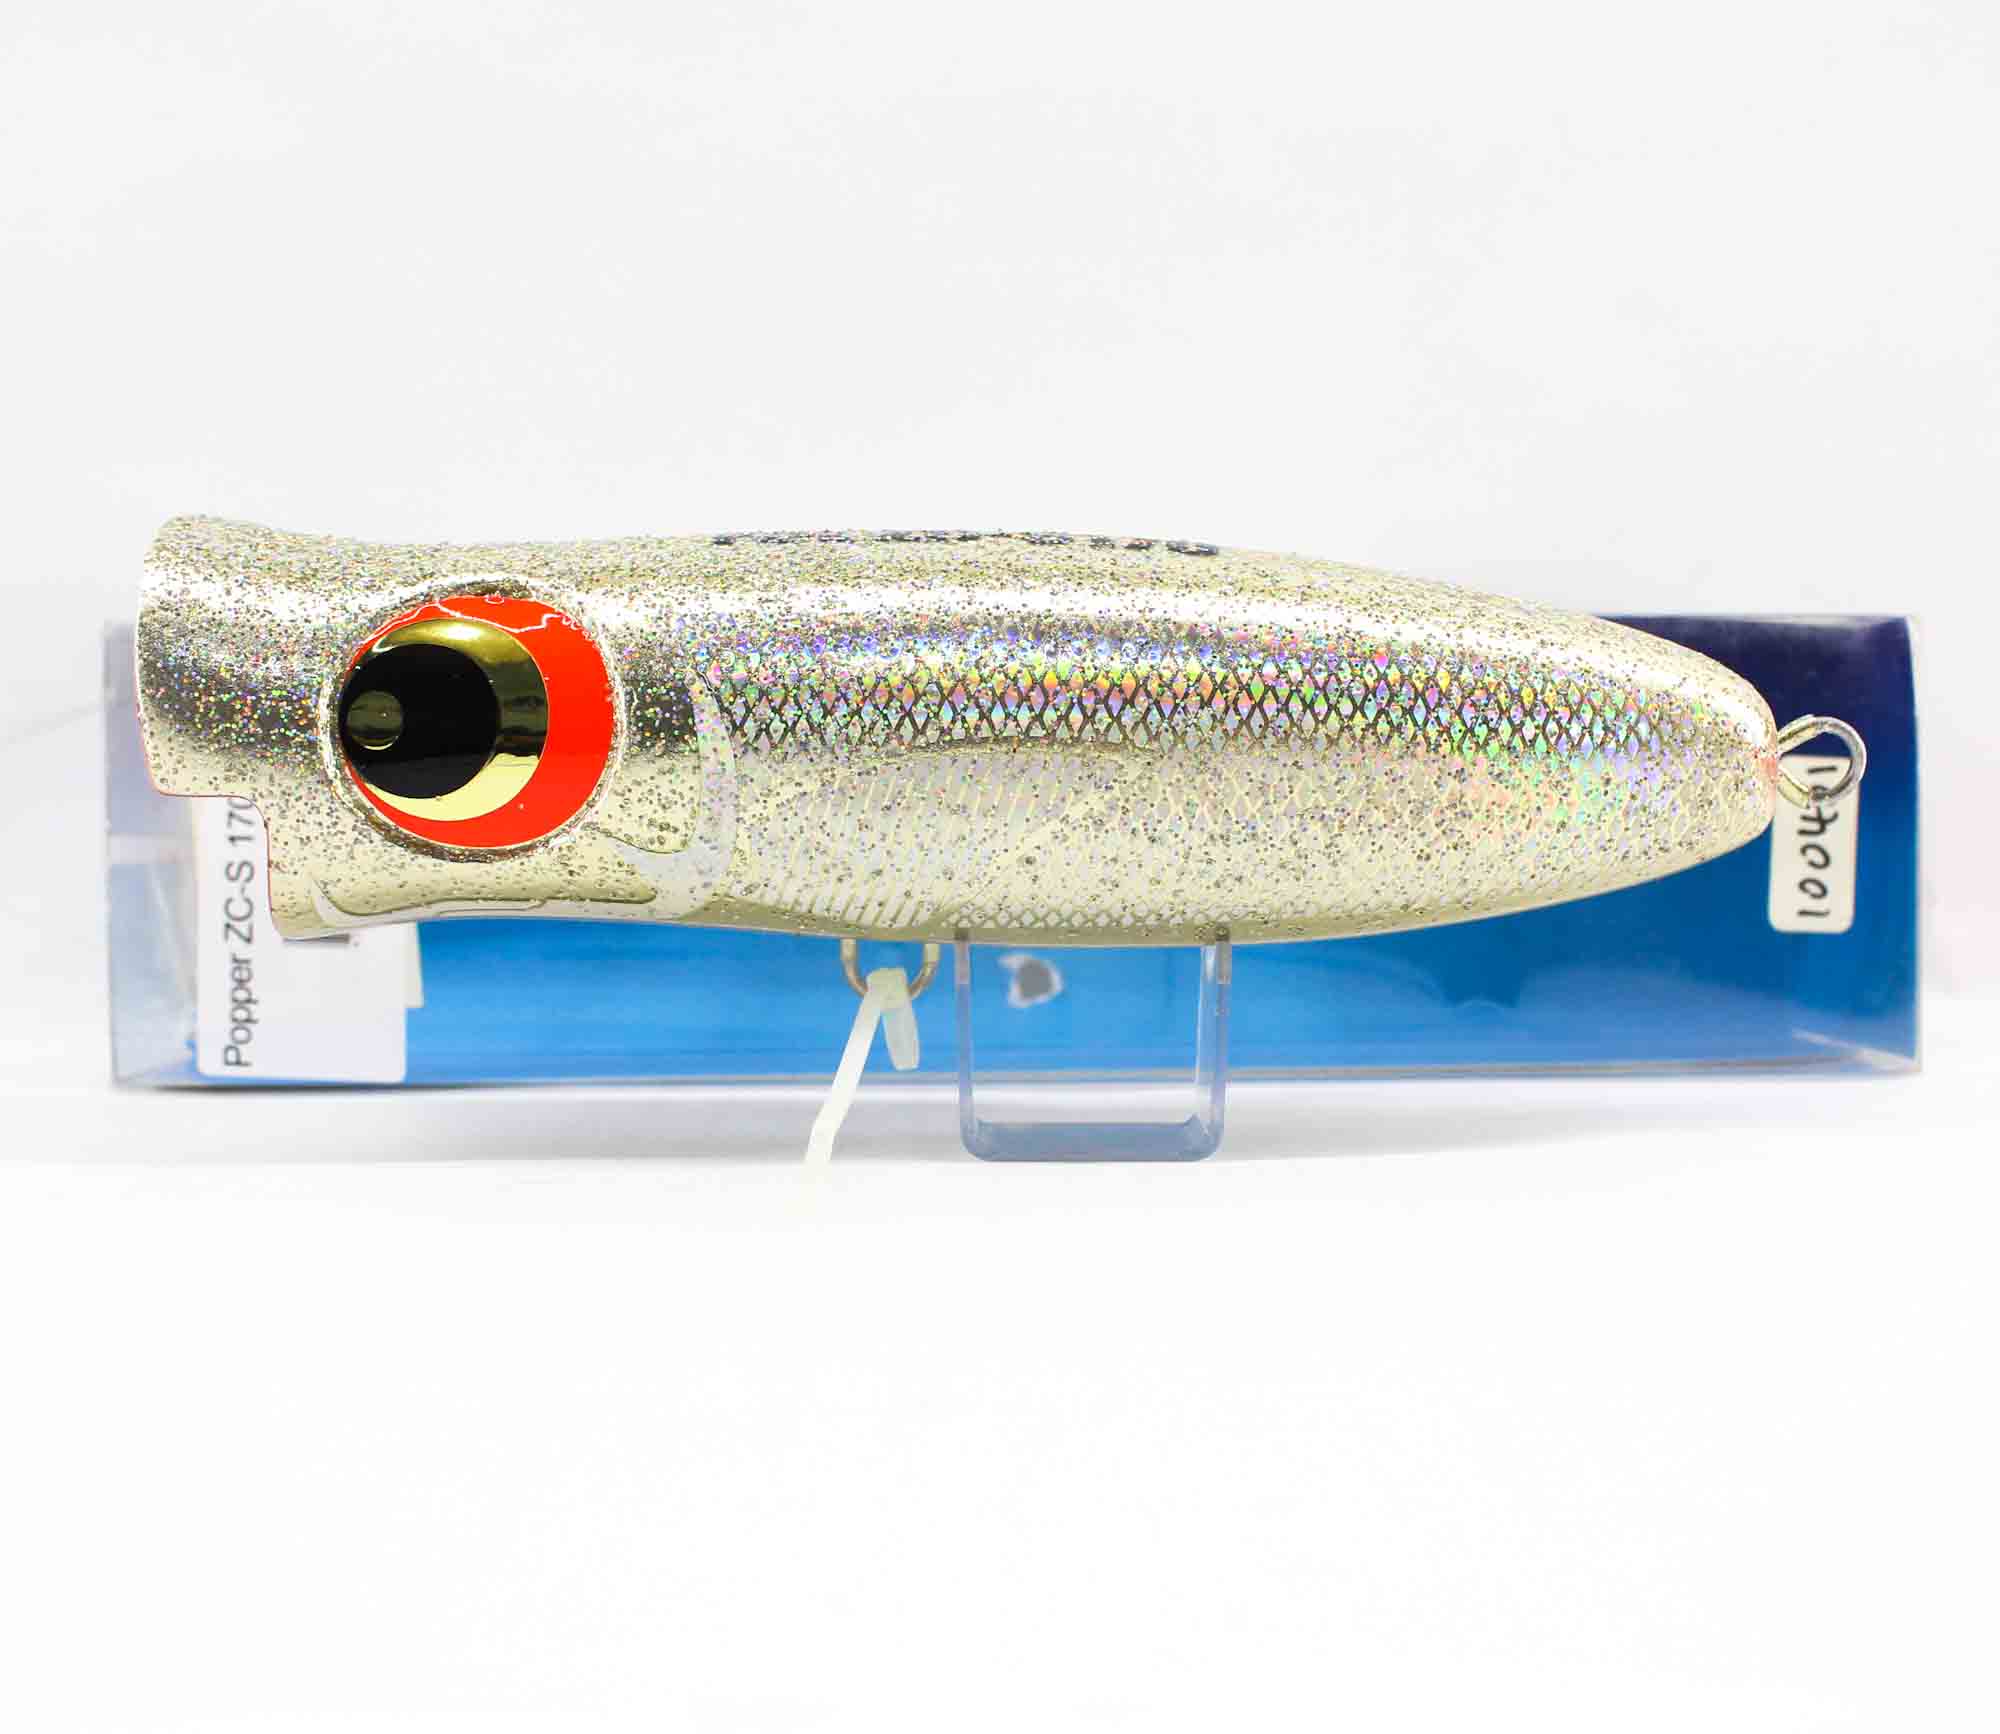 Buy FCL Labo Lures & Baits Online